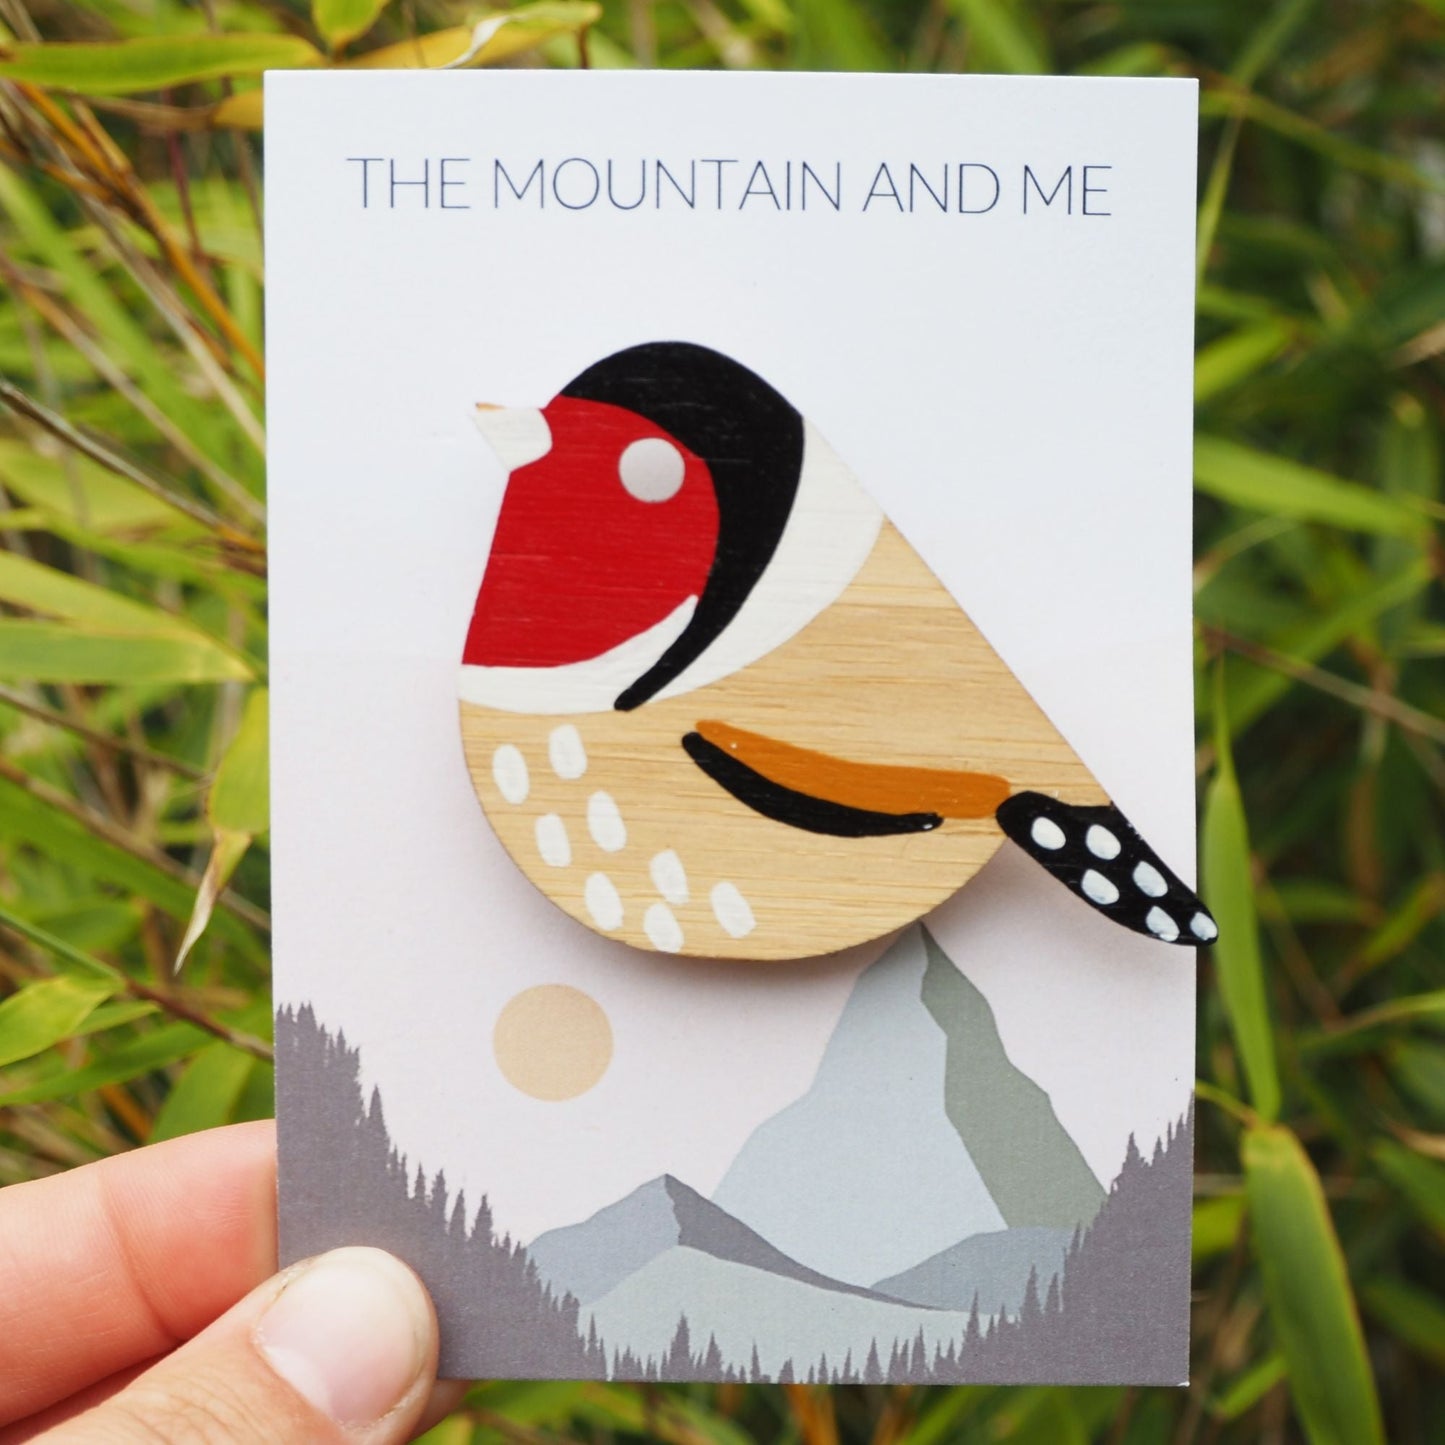 The gold finch brooch on the Mountain and Me branded backing card. It's being held in front of some greenery.